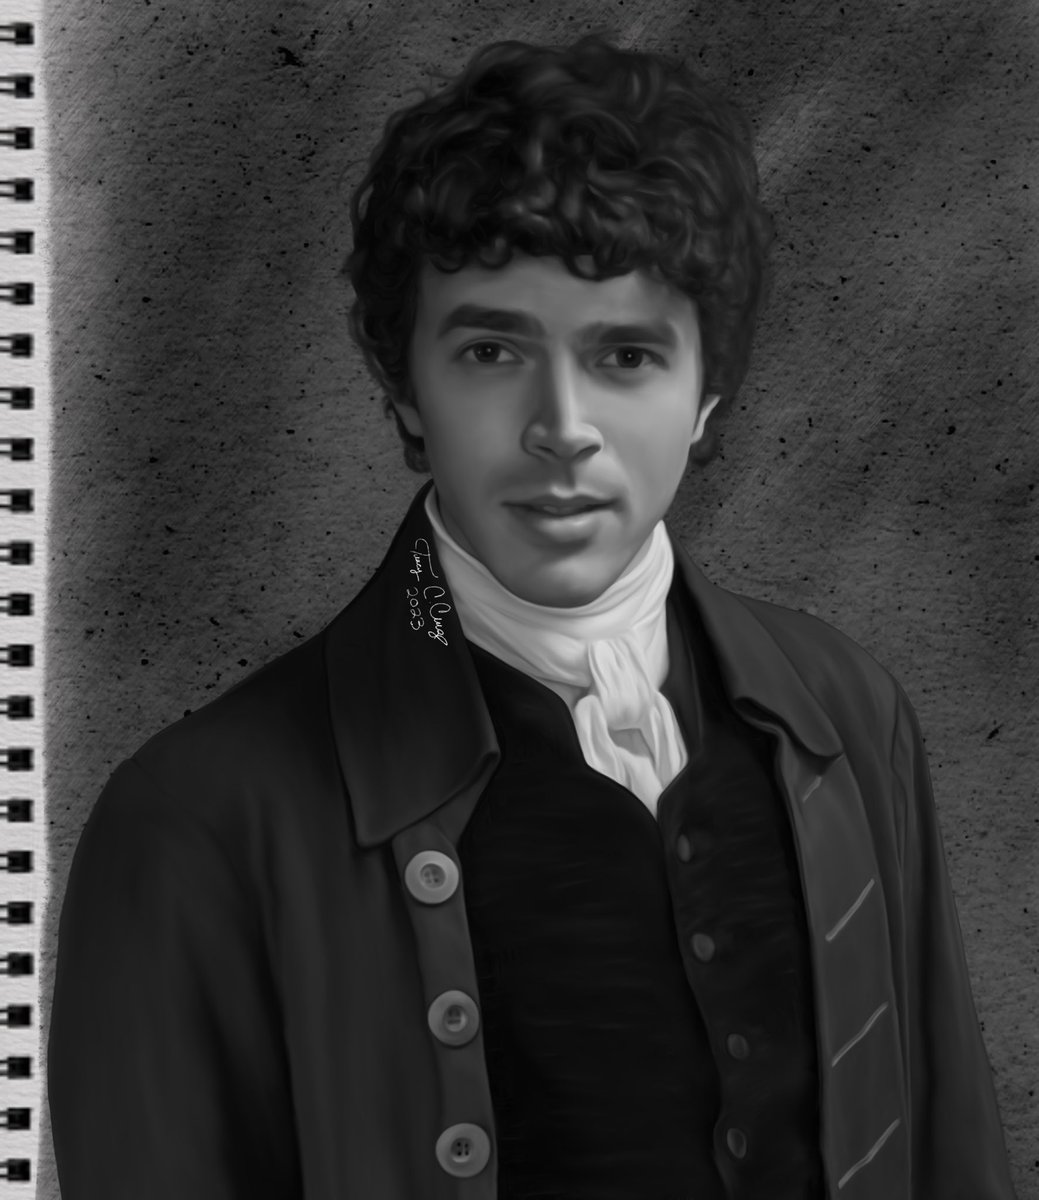 I hope cancer hasn’t wrecked all my skills. I started this #graphite #charcoal #procreate #ipad #drawing of #harryrichardson as #drakecarne May 14, 2022. He’s definitely is one of the best (IMO) heroes in Poldark! #artwork #portrait #talent #actor #BringBackPoldark #artist